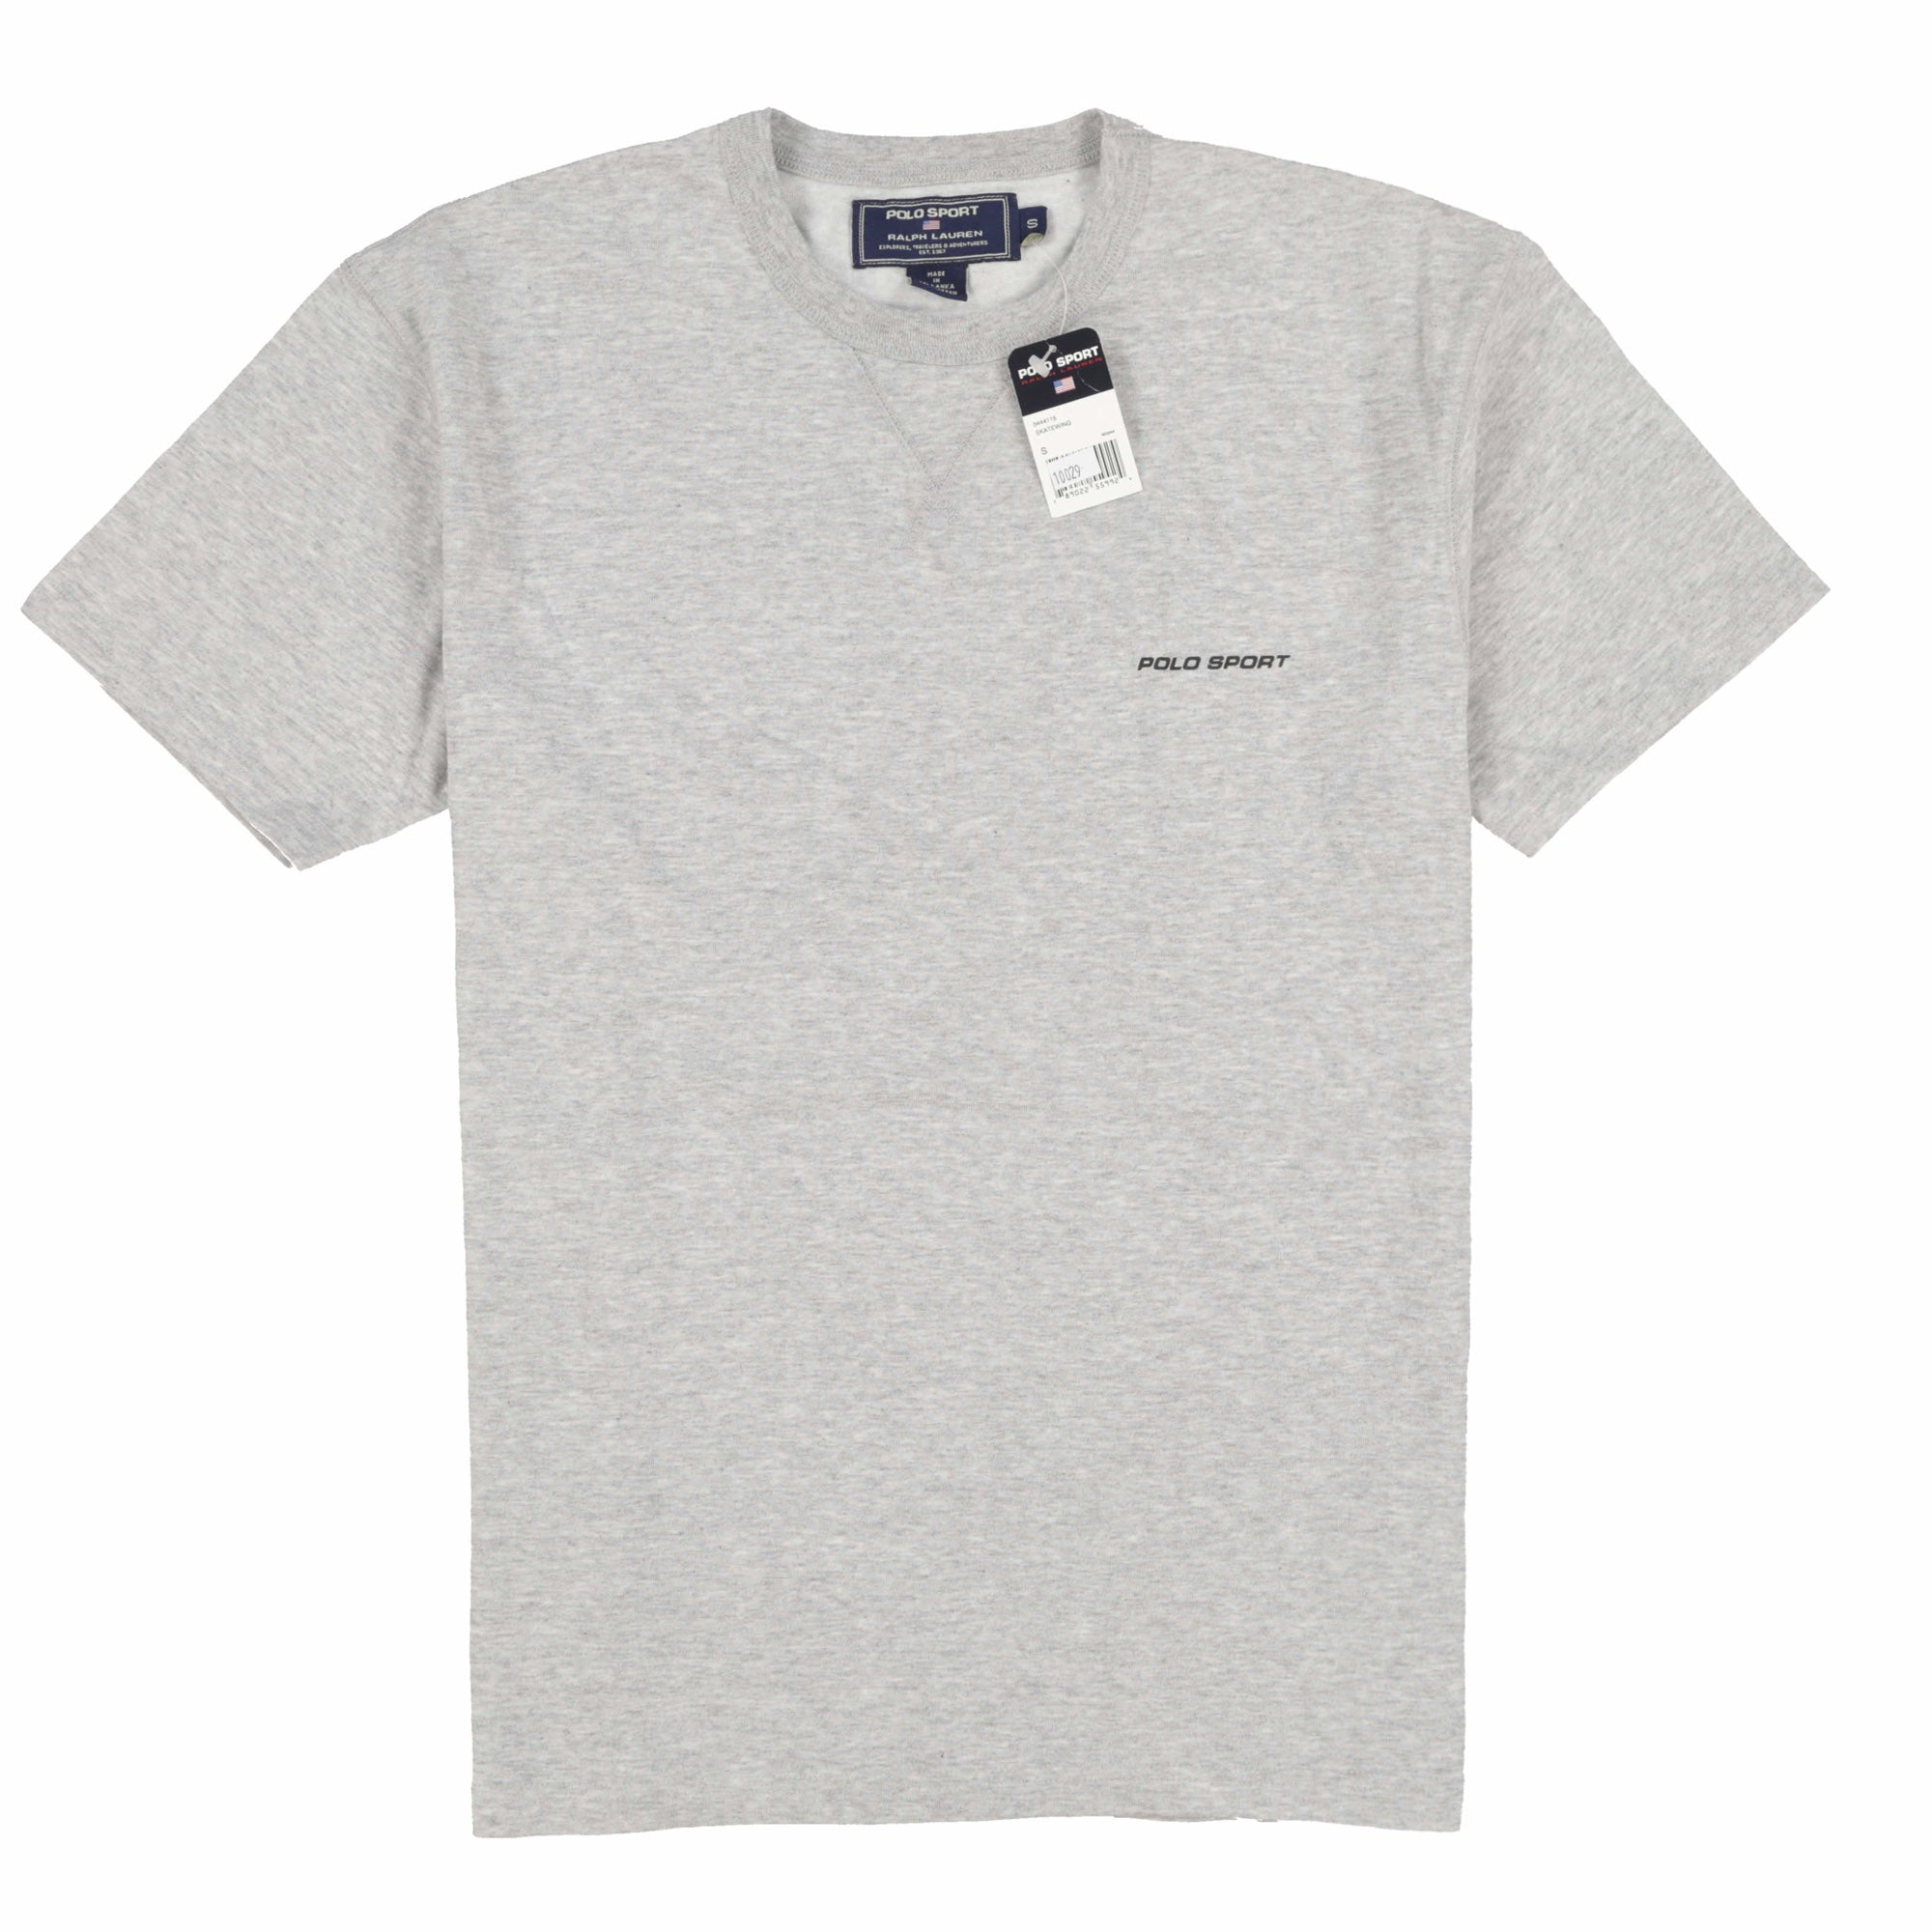 POLO SPORT SKATEWING TEE // OLYMPIC HEATHER